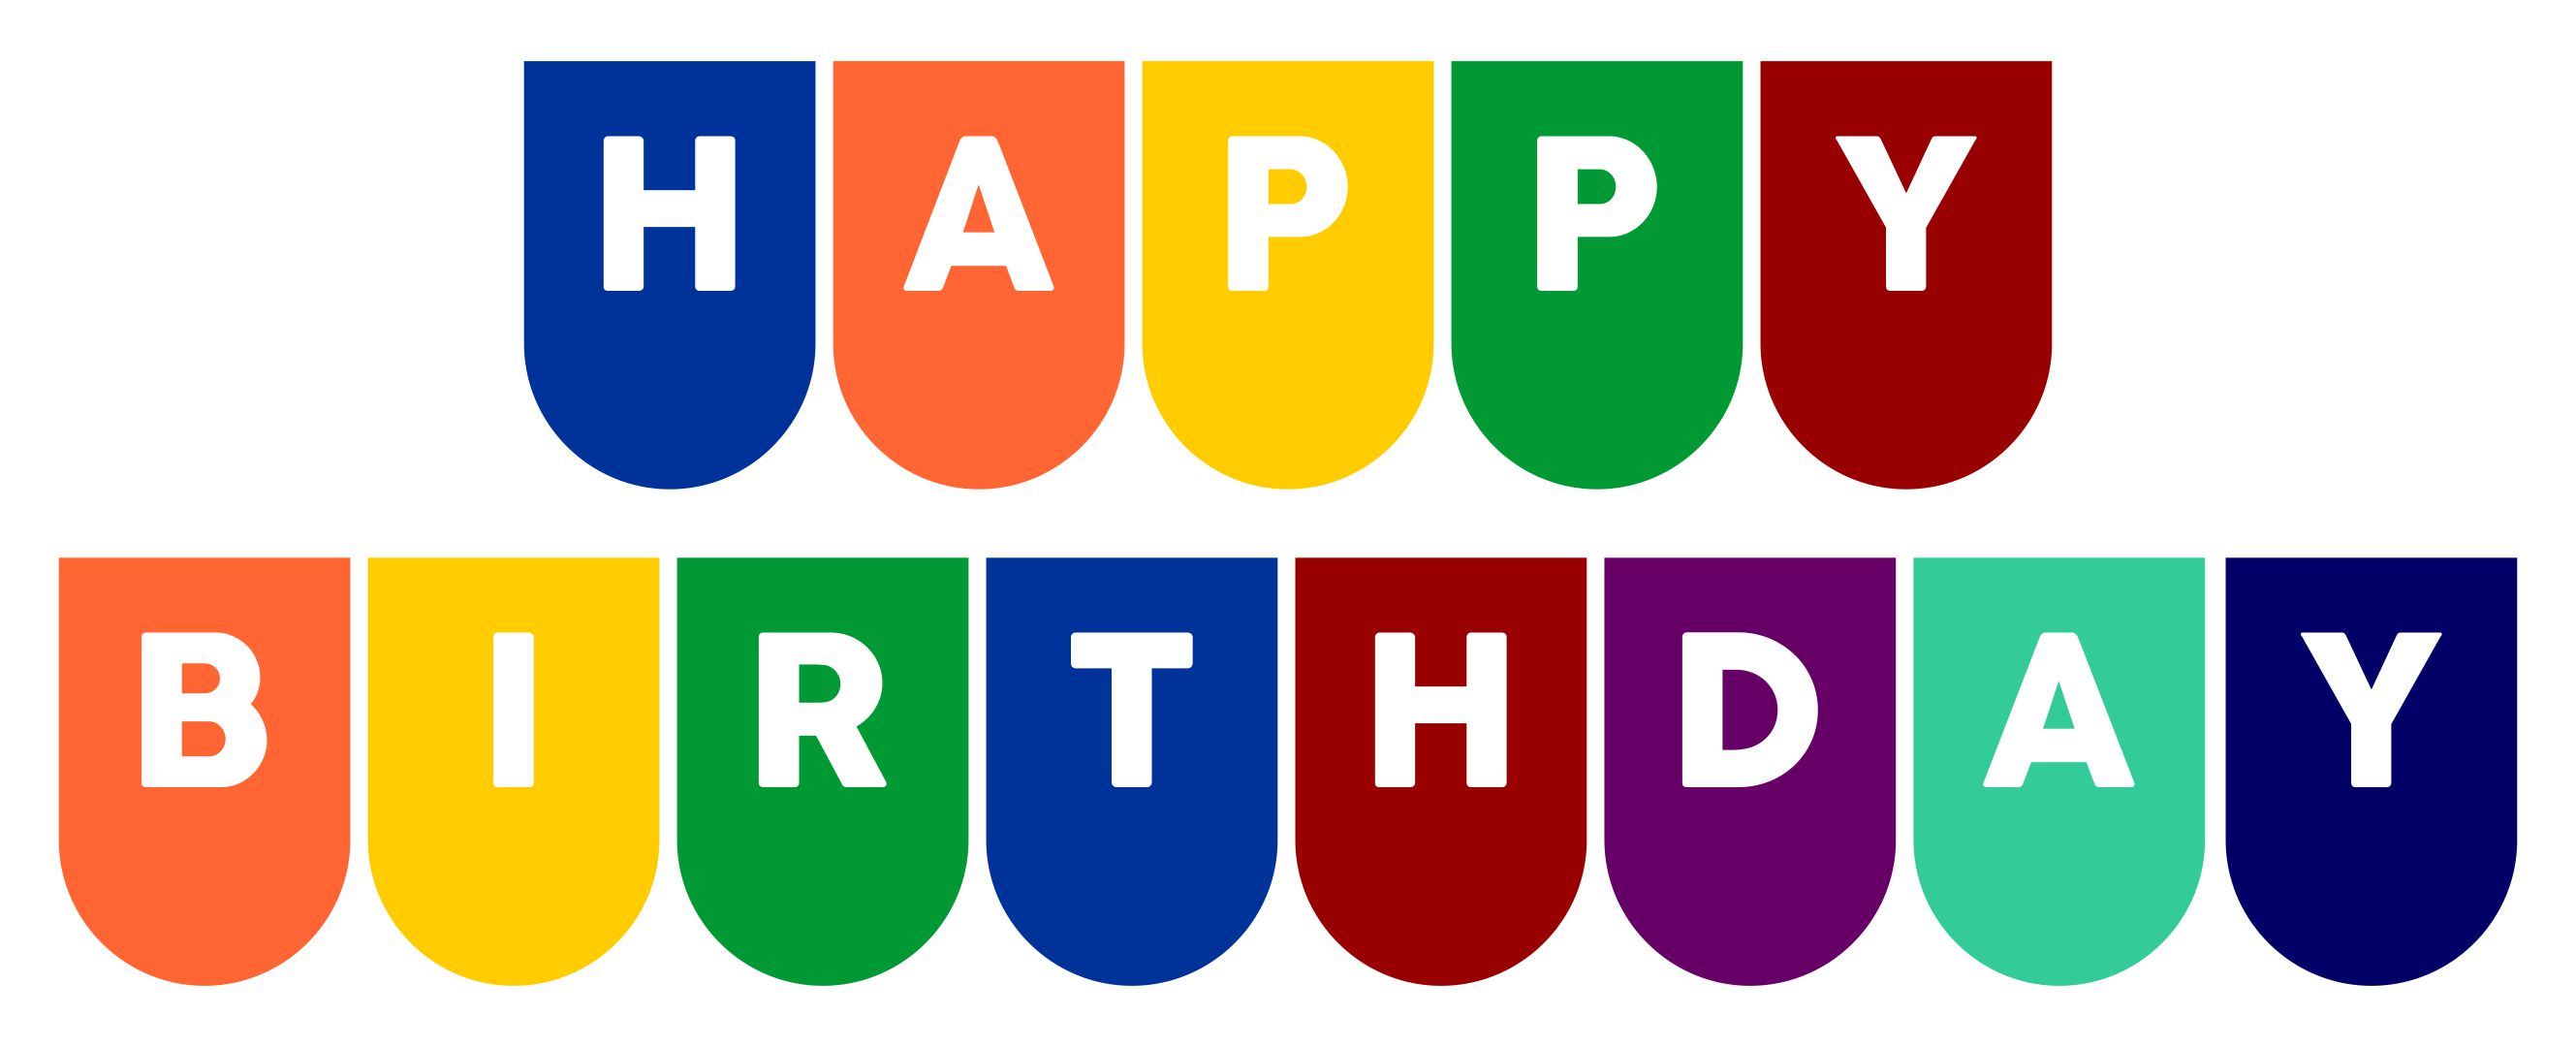 22 Best Happy Birthday Printable Banners Signs - printablee.com Within Free Printable Happy Birthday Banner Templates